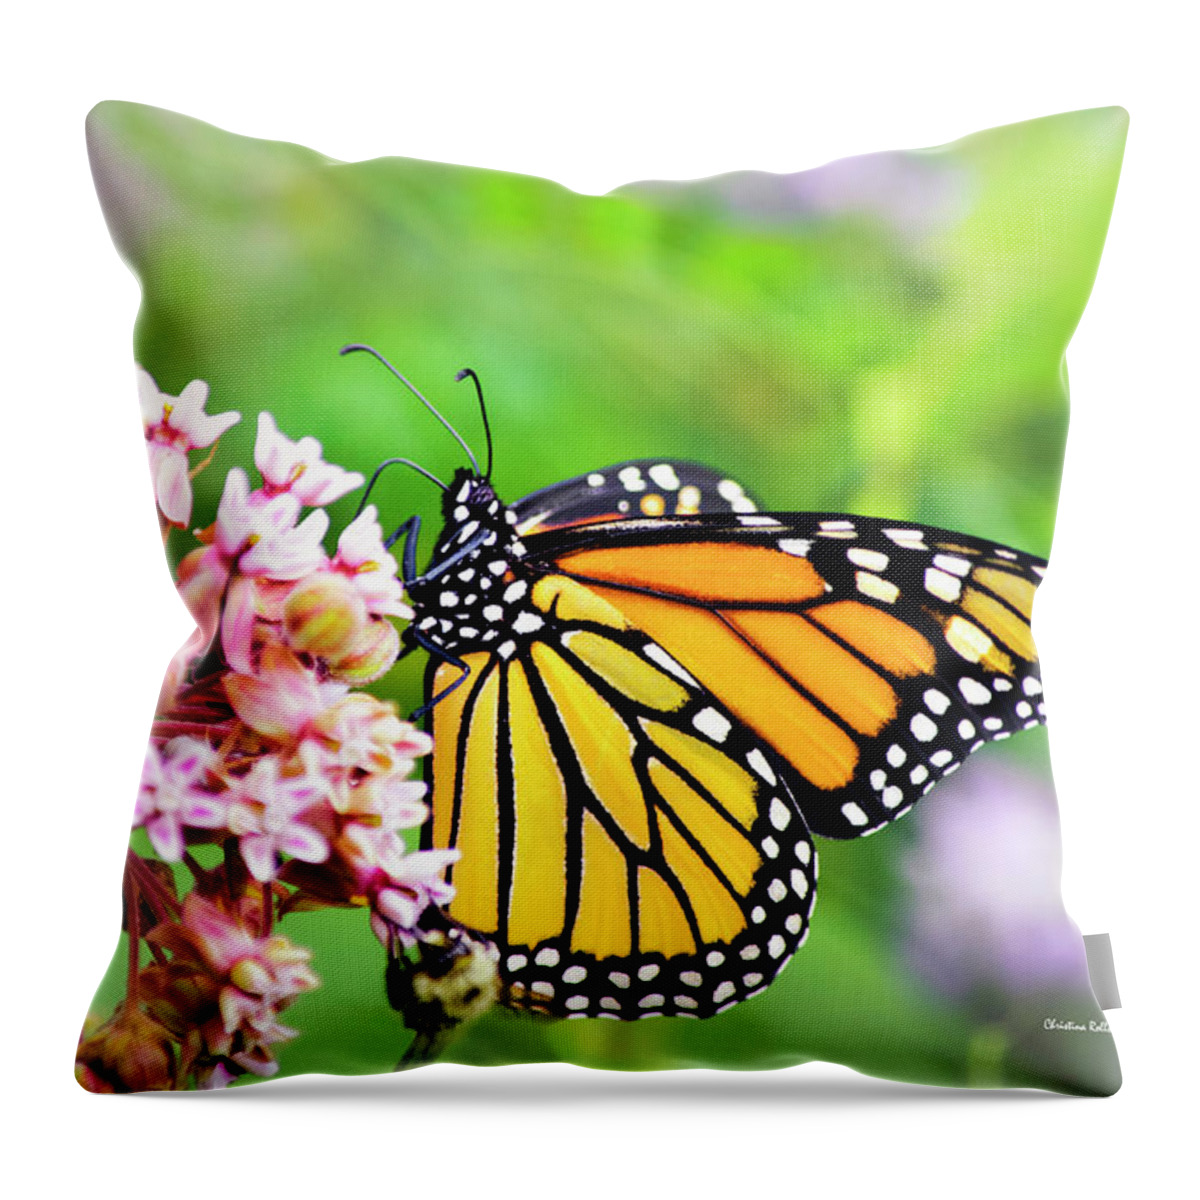 Butterflies Throw Pillow featuring the photograph Colorful Monarch Butterfly by Christina Rollo